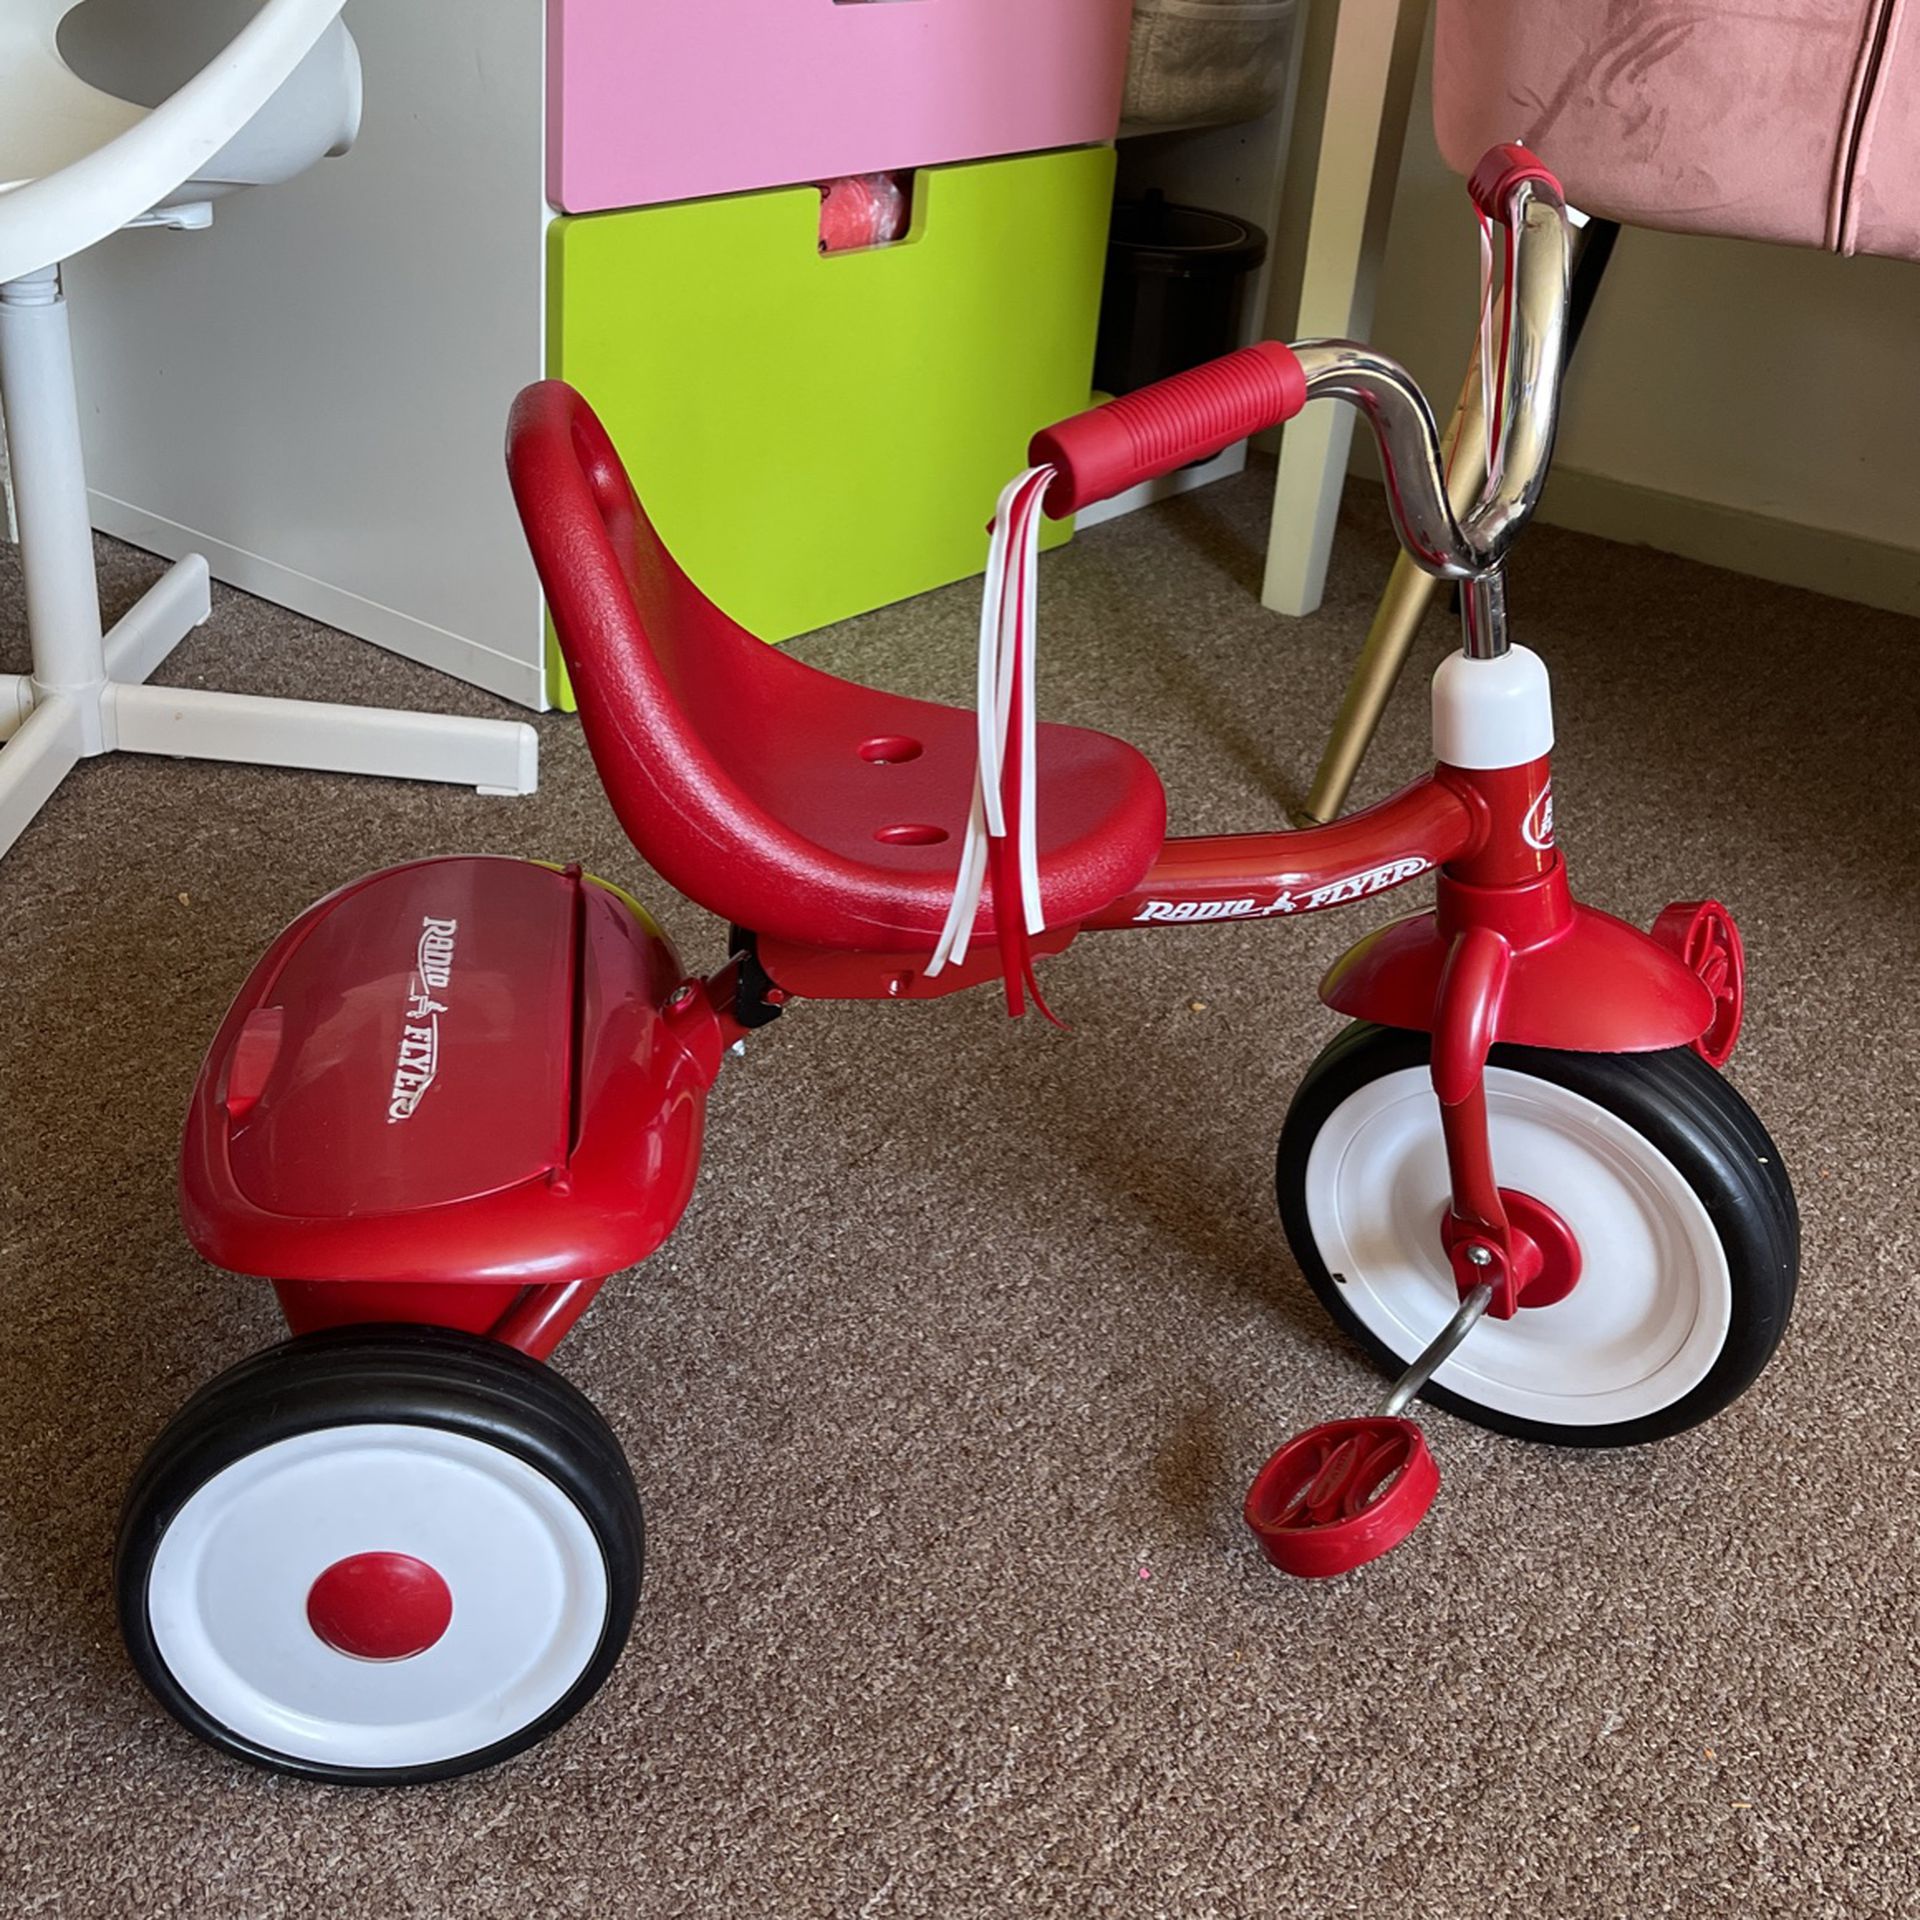 Radio Flyer Tricycle, Very Good Condition, $25